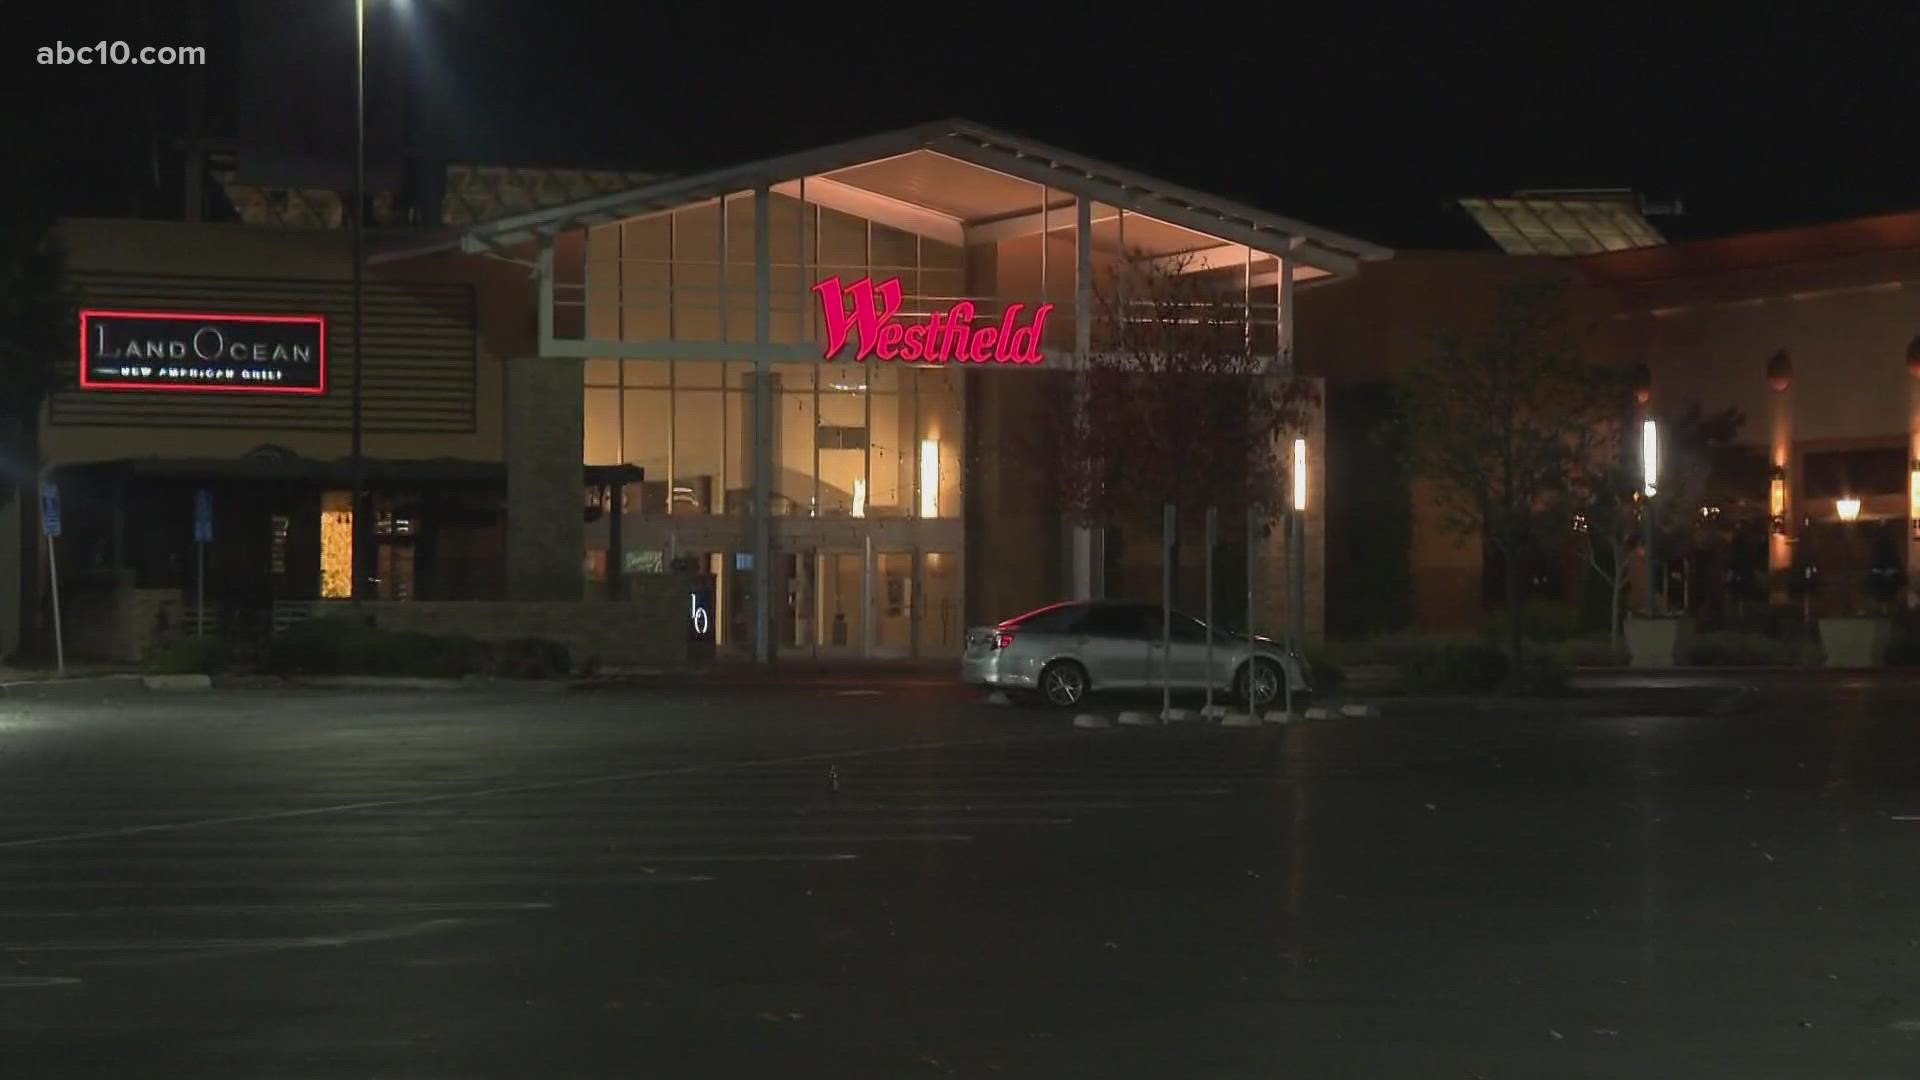 The would-be thieves ran inside the Roseville mall, but were unsuccessful in attempting to enter the closed jewelry store and ran away empty handed.